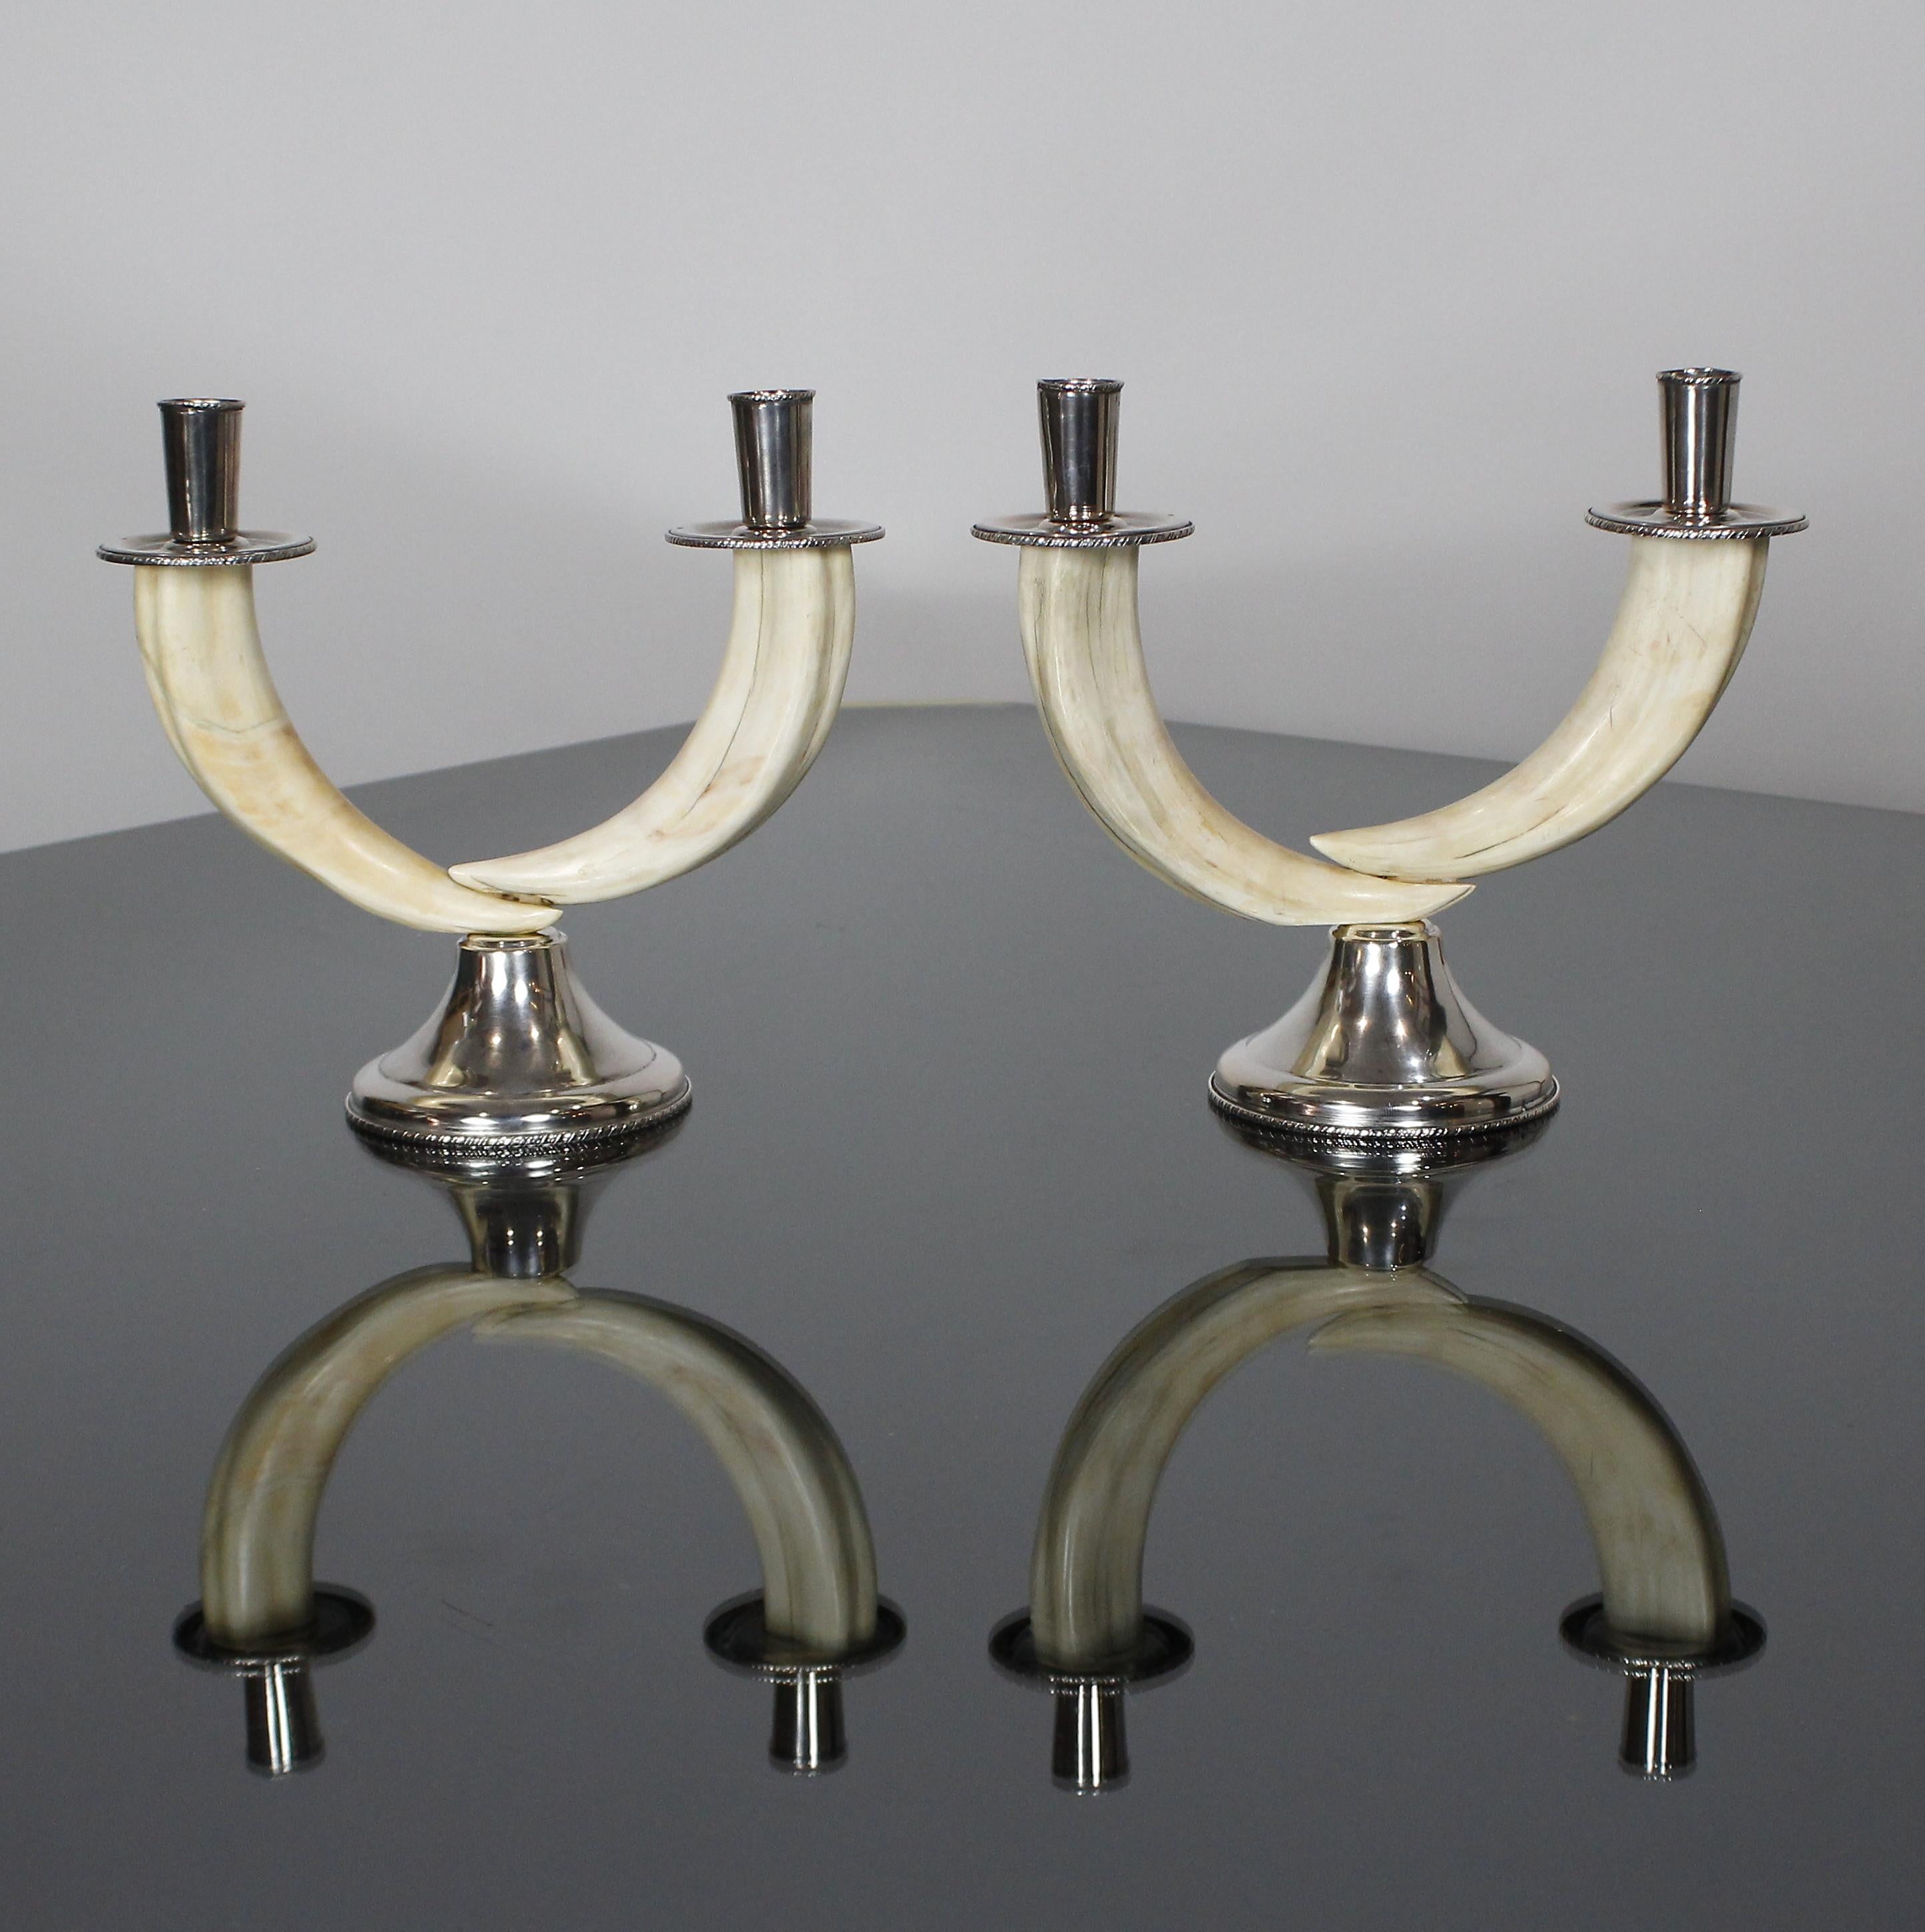 Pair of Italian colonial period (1925-1940) teeth warthog and silver mounted candlesticks with two arms.

800/000 Silver as shown in pictures.

Measurement units :

Inches 
Diameter 9.4 inch height 8.6 inch

Centimetres 
Diameter 24 cm Height 22